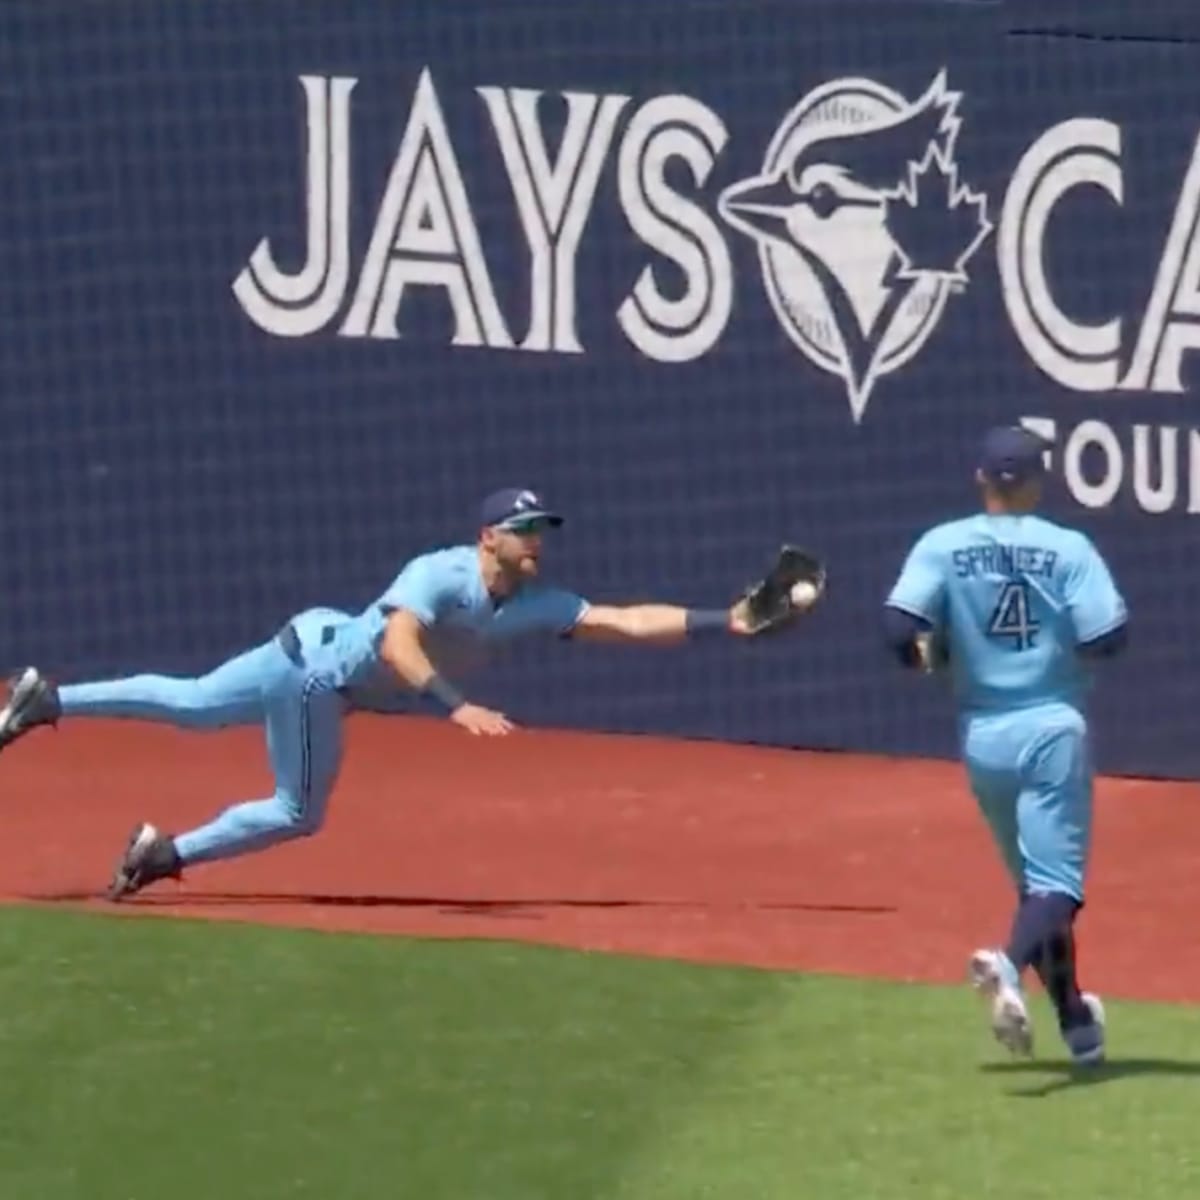 Blue Jays Gold Glover Goes Full Extension to Make One of the Best